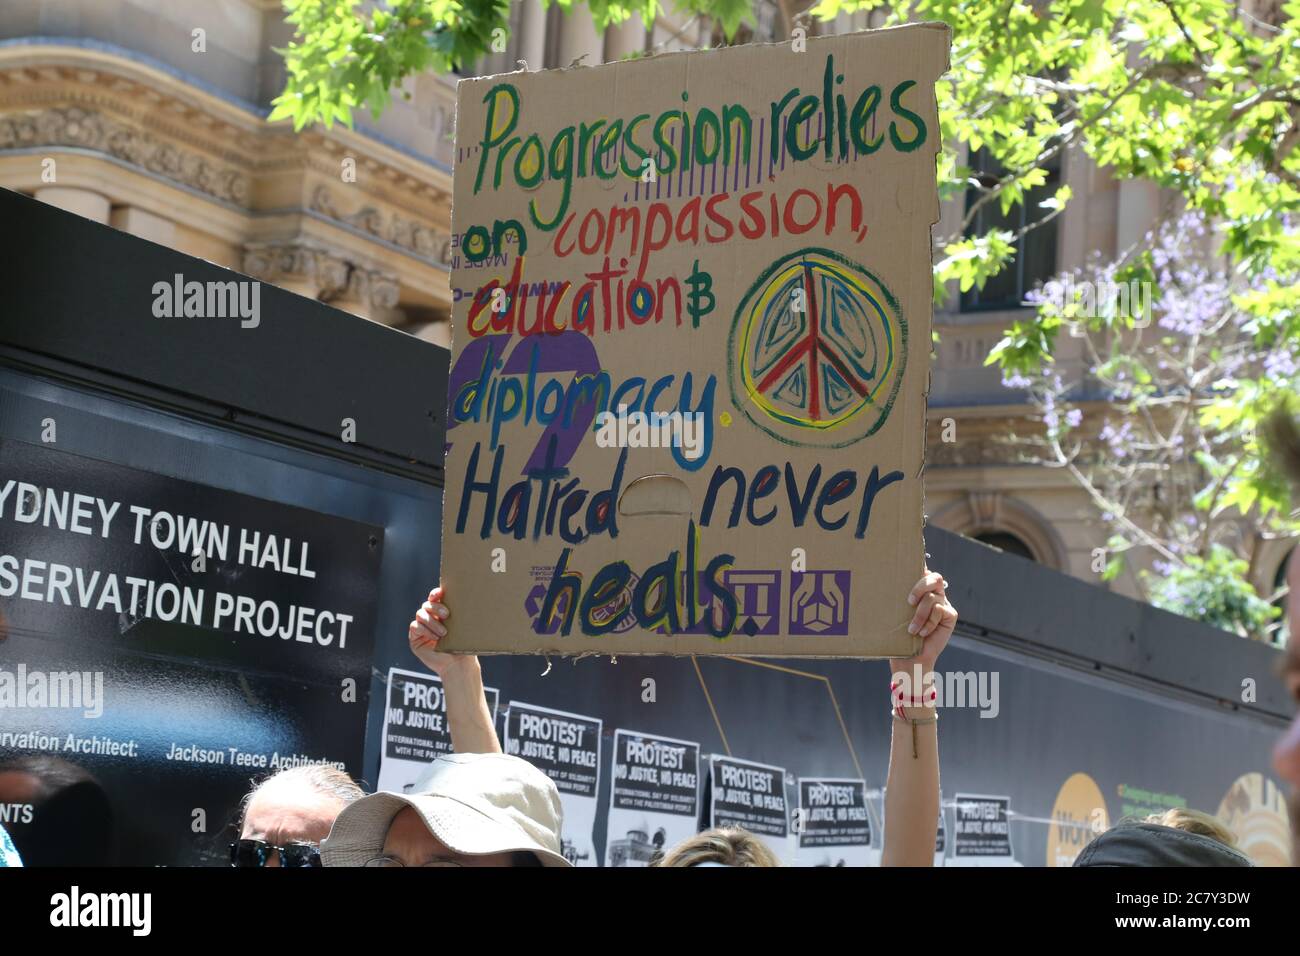 A protester holds a sign saying, ‘progression relies on compassion, education & diplomacy. Hatred never heals’ at the Sydney rally against war in Iraq Stock Photo